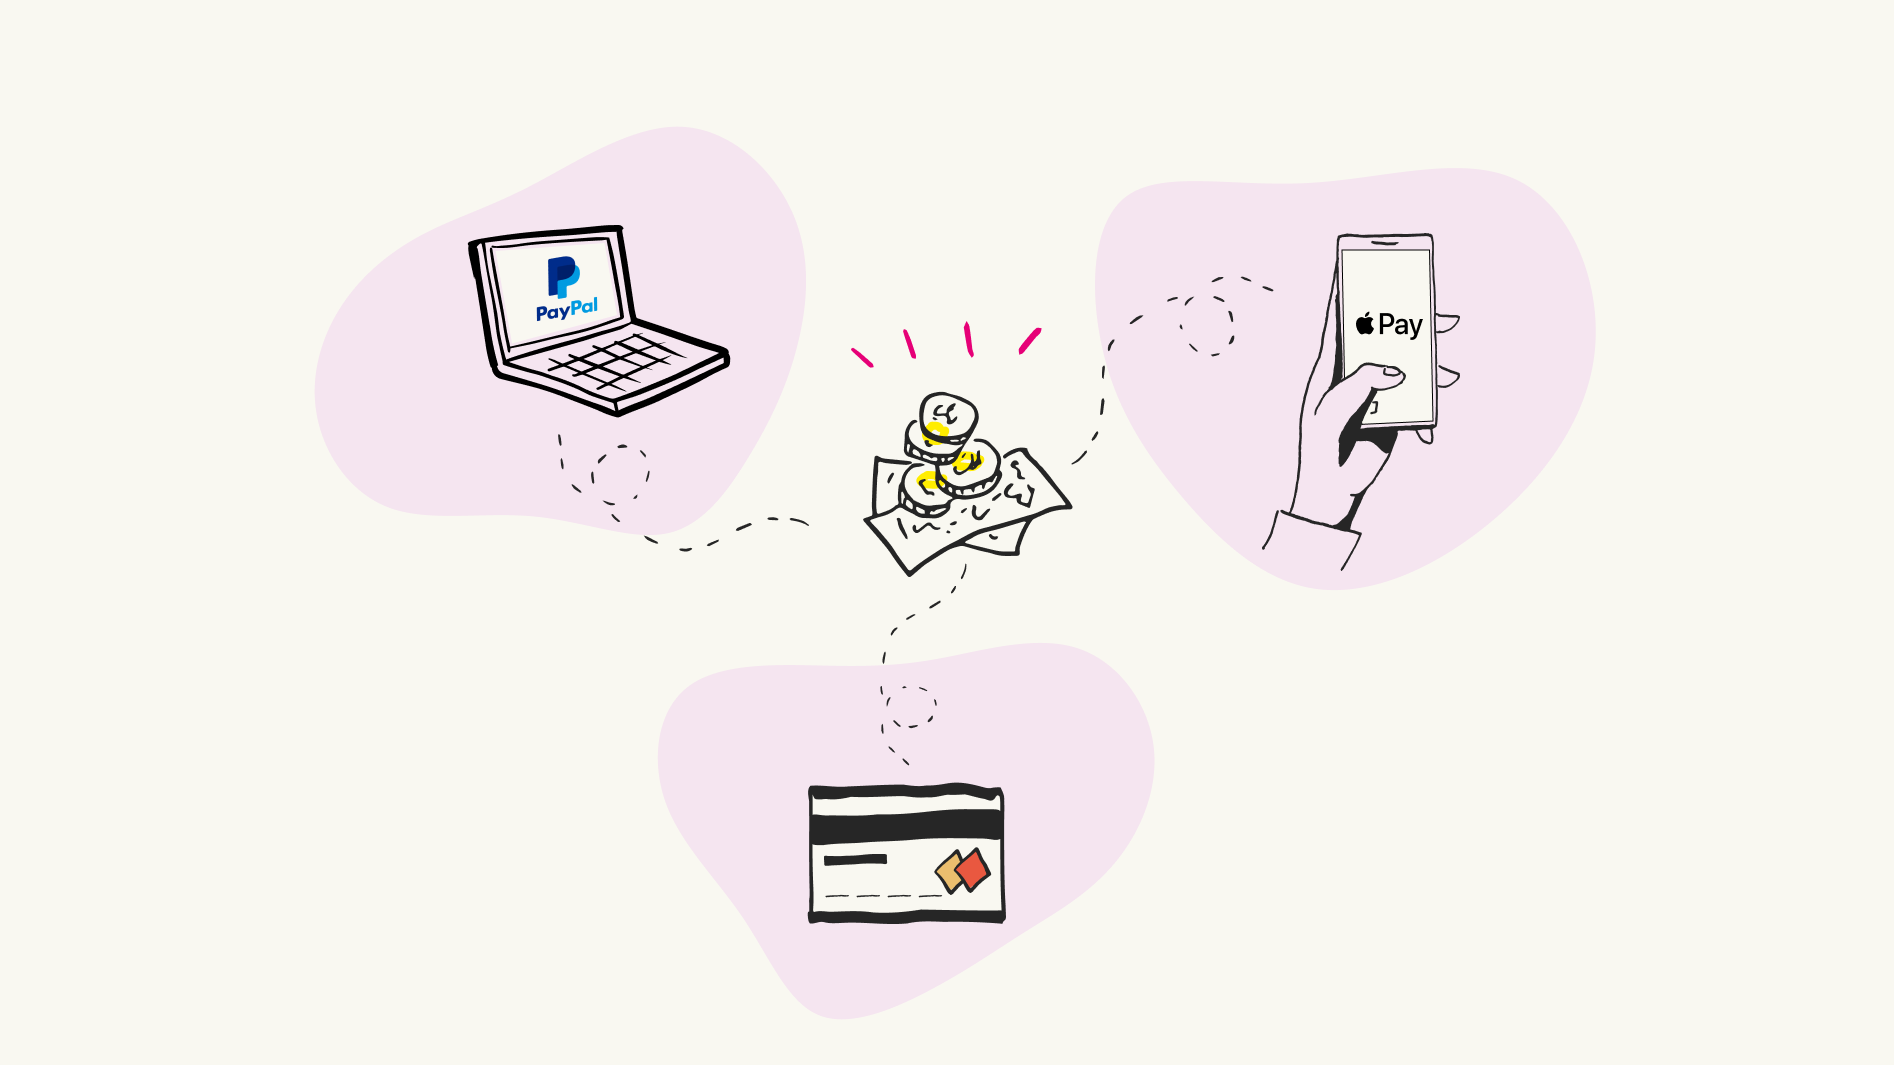 The image depicts three different online payment options in a playful, infographic style, each illustrated within a pink heart-shaped background. On the left, a laptop displays the PayPal logo on its screen, representing a widely-used digital wallet. In the center, there's a treasure map leading to a coin, symbolizing the concept of savings or rewards associated with certain payment methods. On the right, a hand holds a smartphone displaying the Apple Pay interface, indicating a mobile payment solution. Below these, a credit card is shown, hinting at traditional payment methods. Overall, the graphic suggests a variety of payment options available for online transactions, enhancing the user experience in digital commerce.